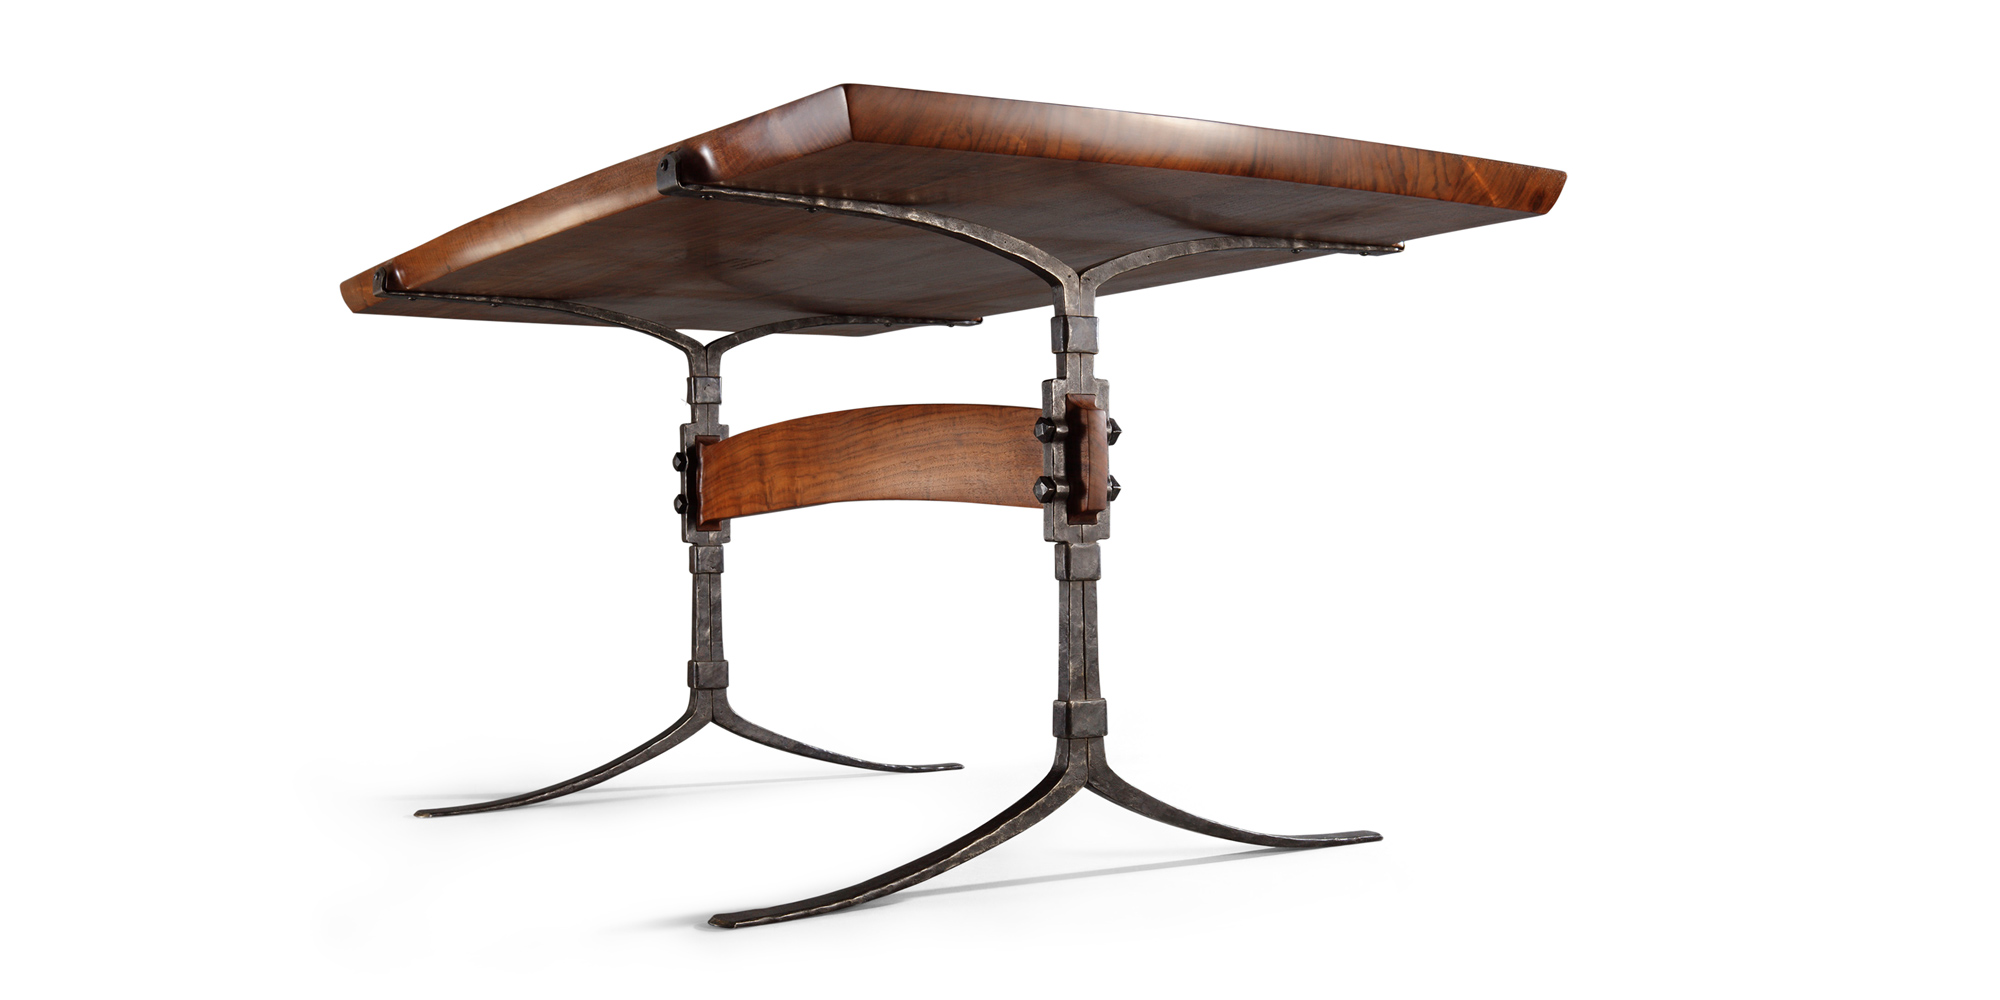 Our custom handmade Sandhill Table w/ hand-forged iron